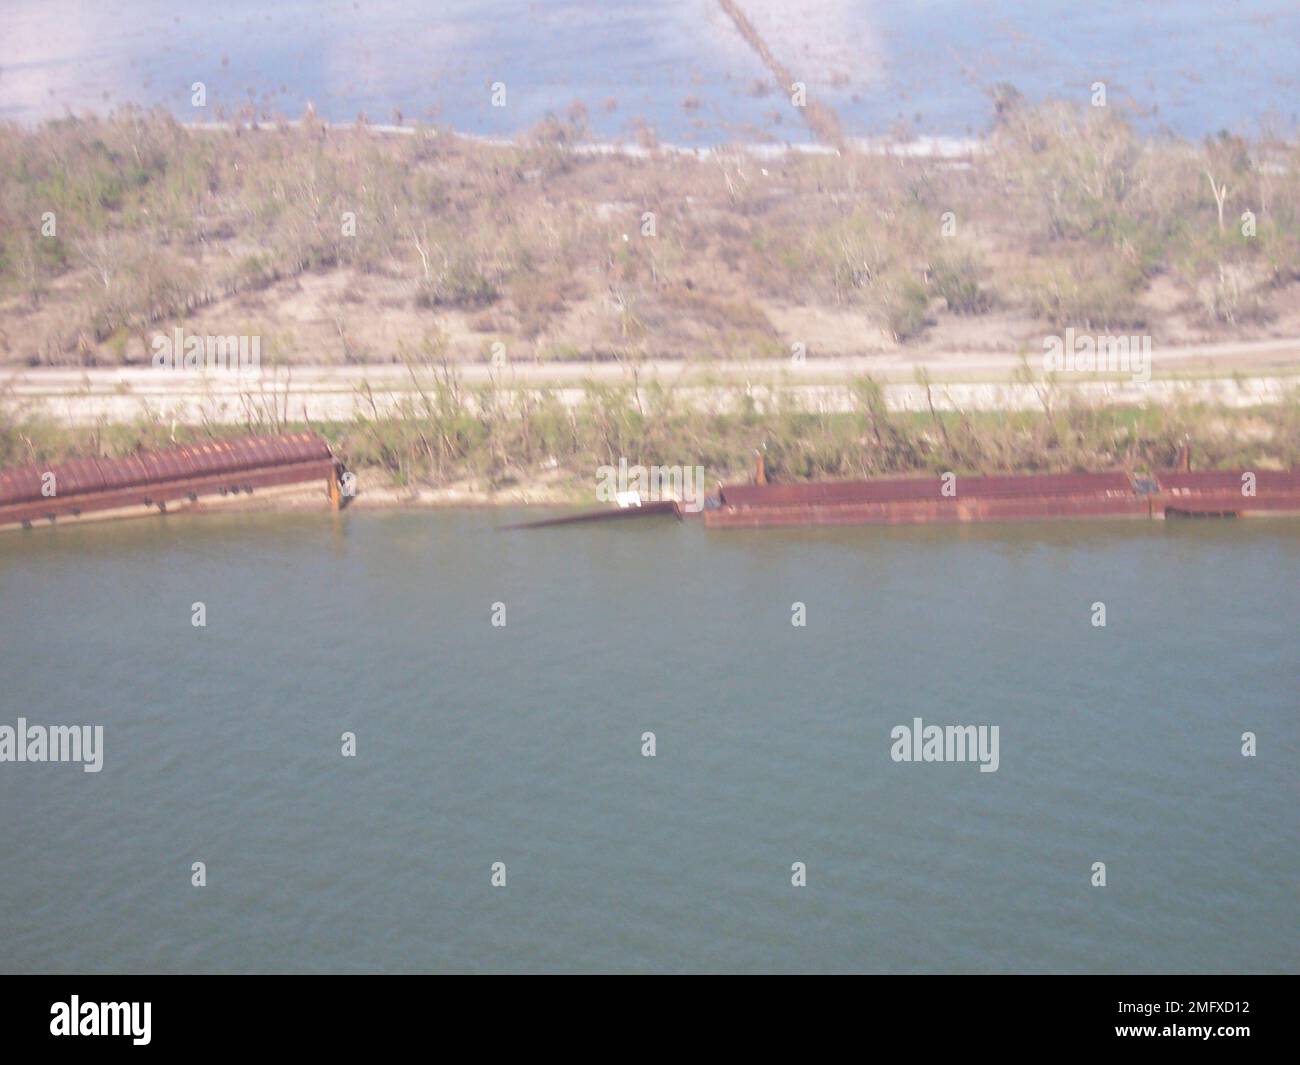 Overflight - Potter - Pilottown and North - 26-HK-211-99. 29 38.362N 089 56.310W; Grounded Barges. Hurricane Katrina Stock Photo